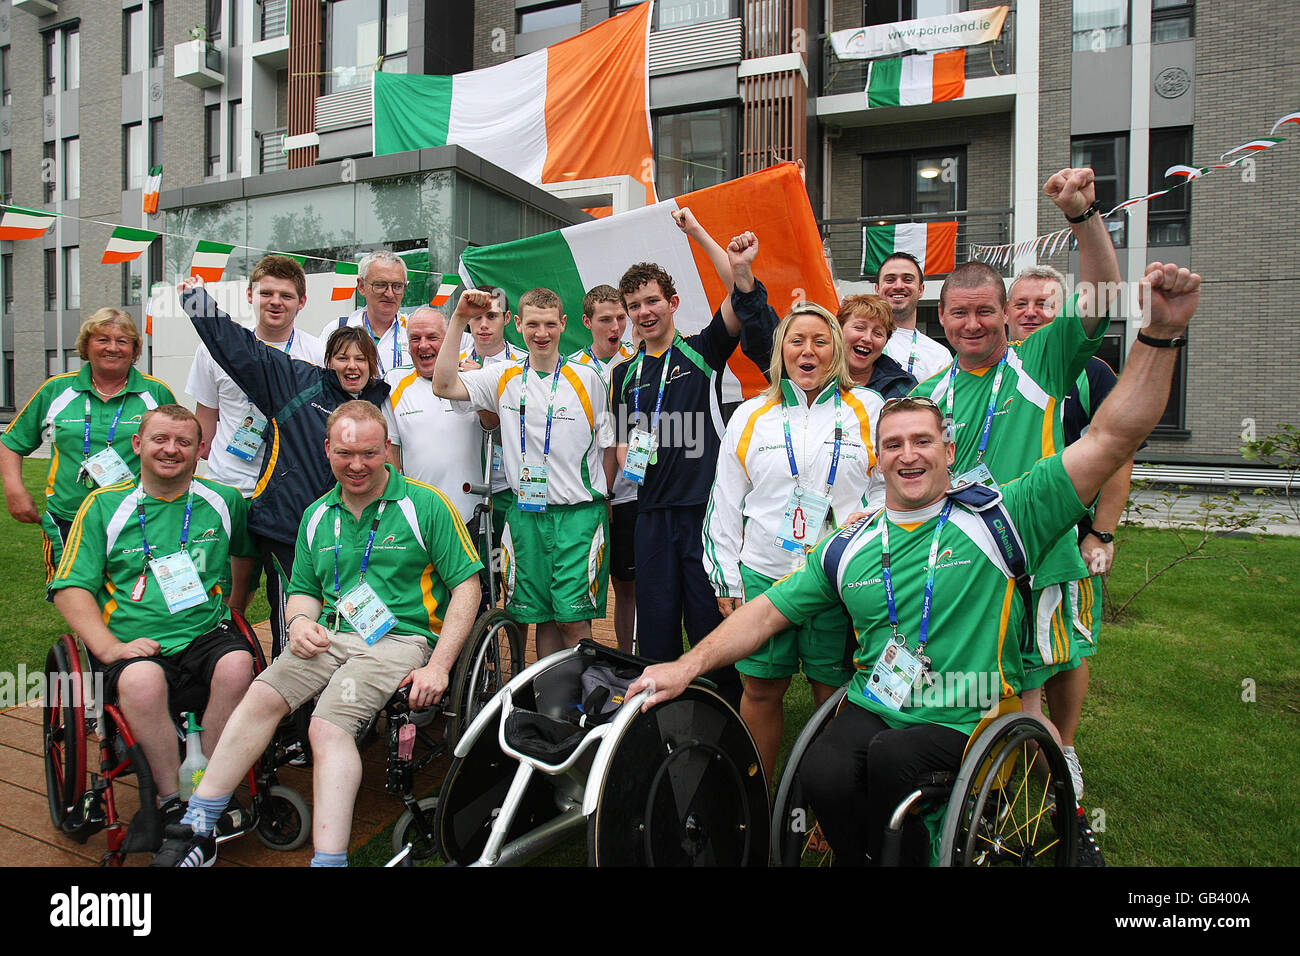 Republic of Ireland's Olympic Team members outside their residential complex in the Paralympic Village in Beijing, China. Stock Photo